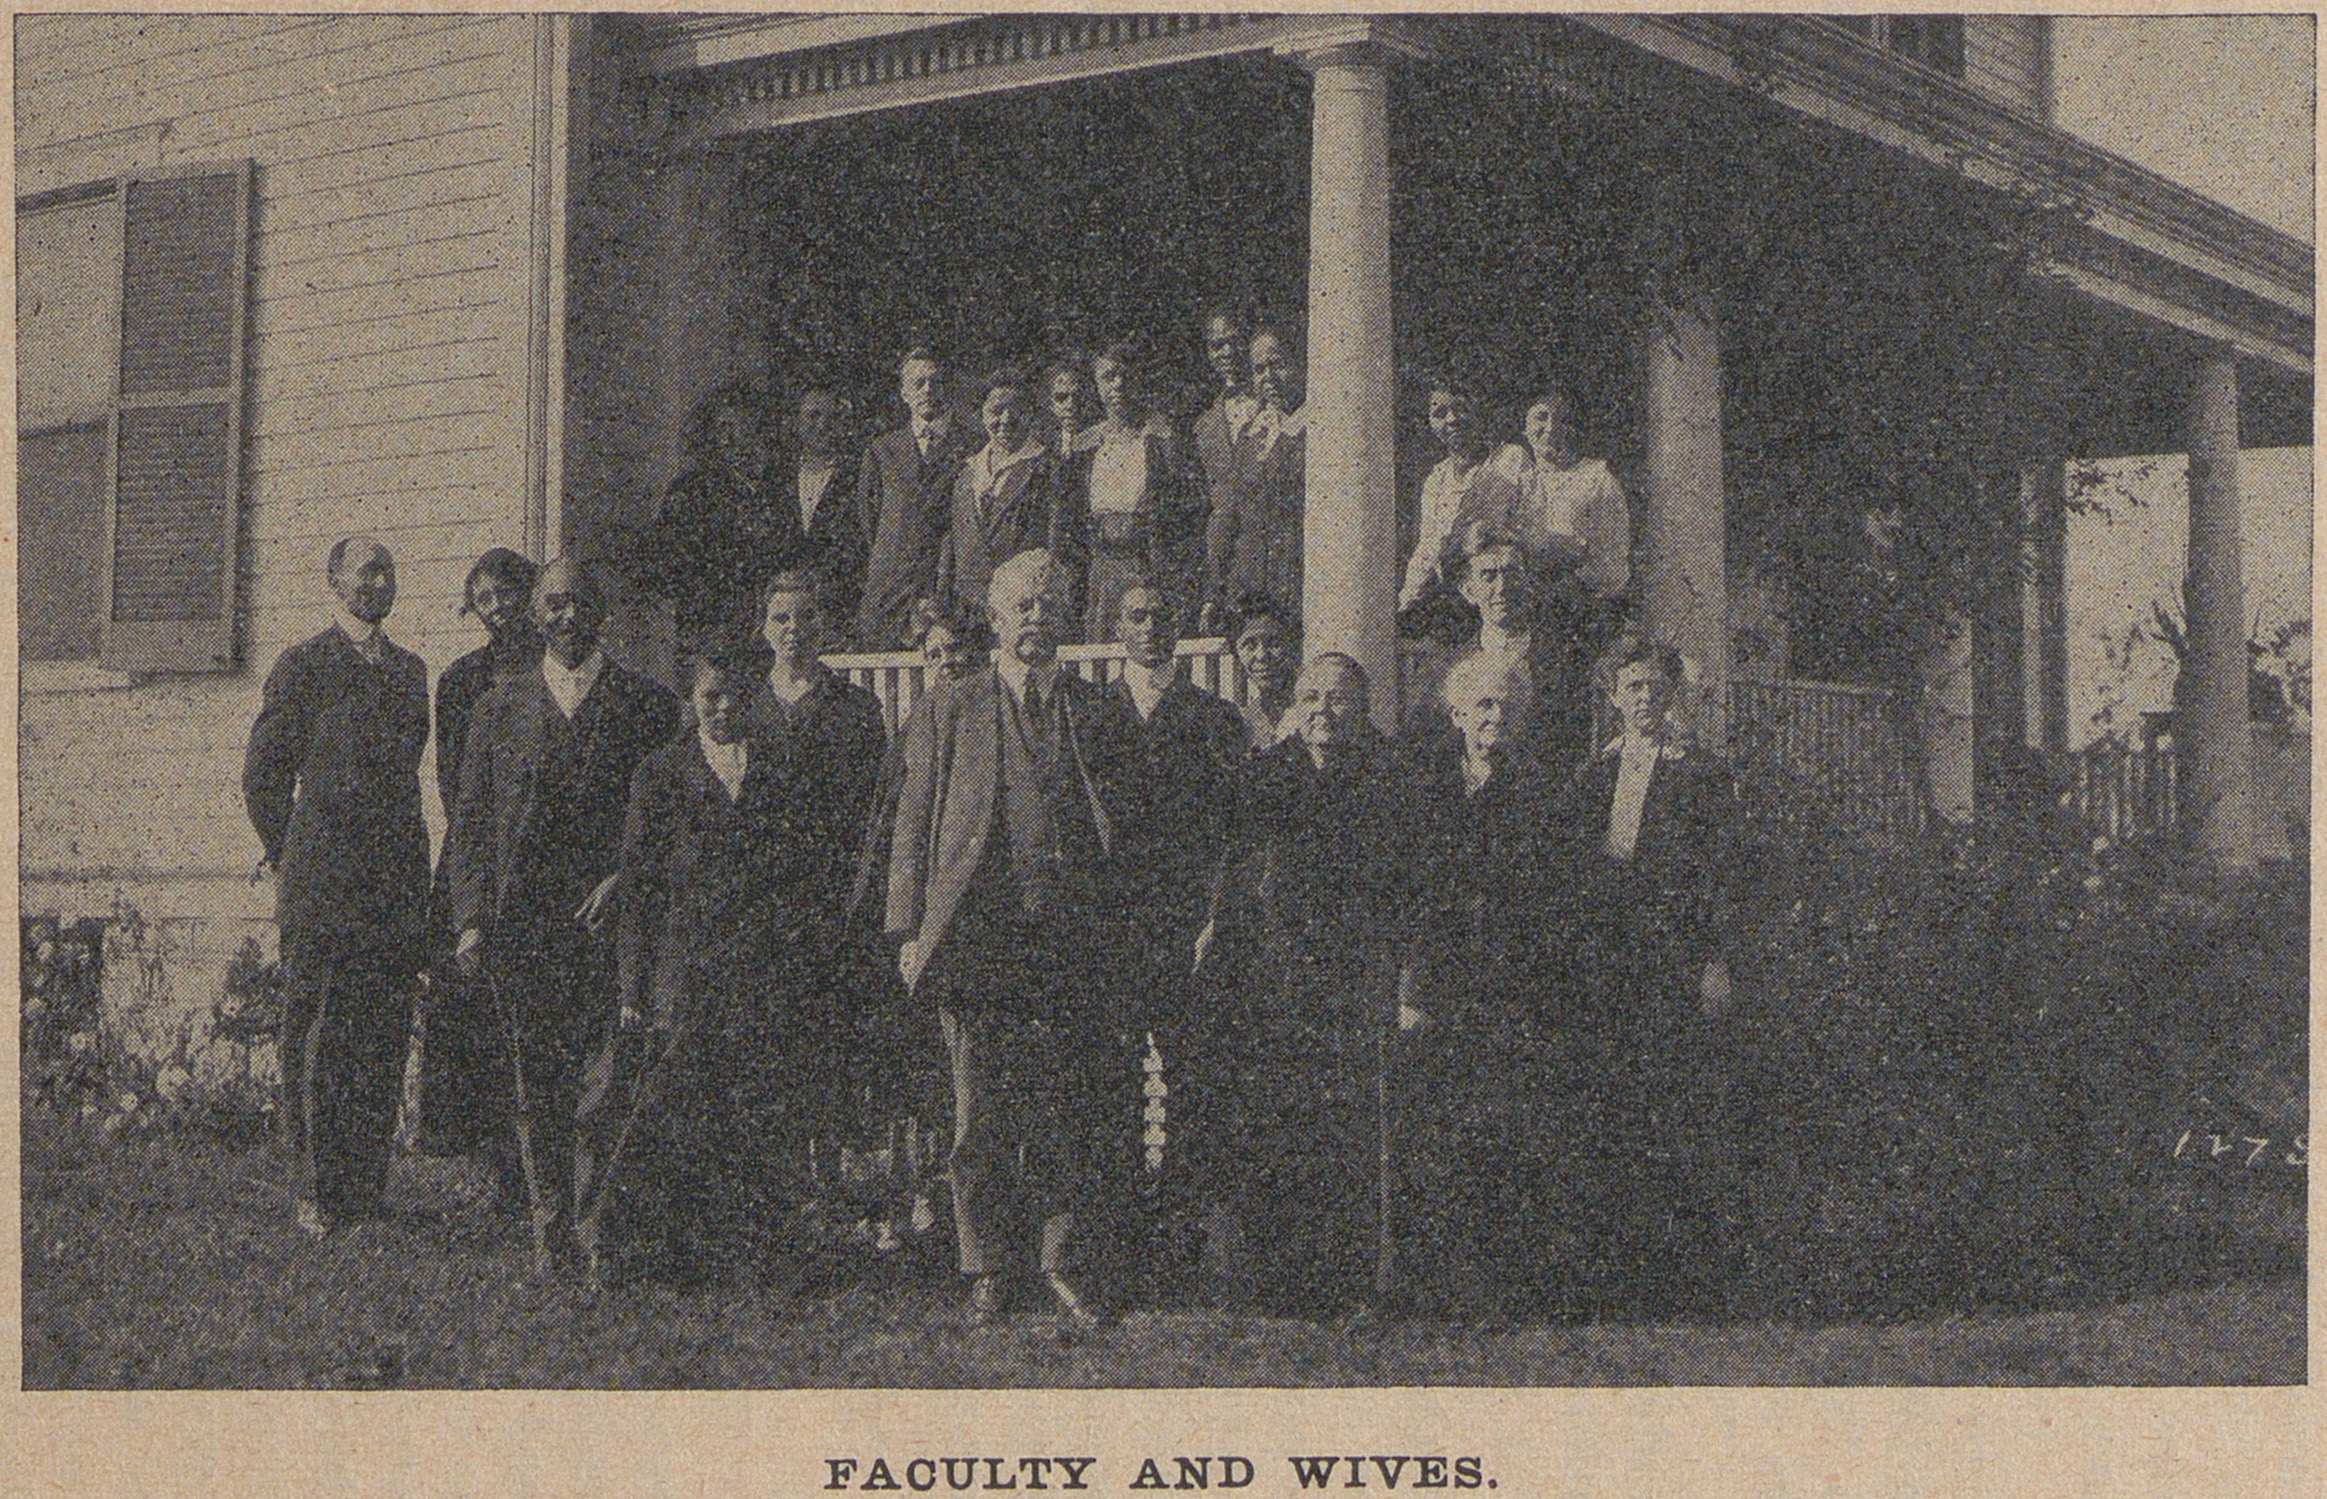 Black and white photograph of an interracial group of educators and their spouses on a porch.